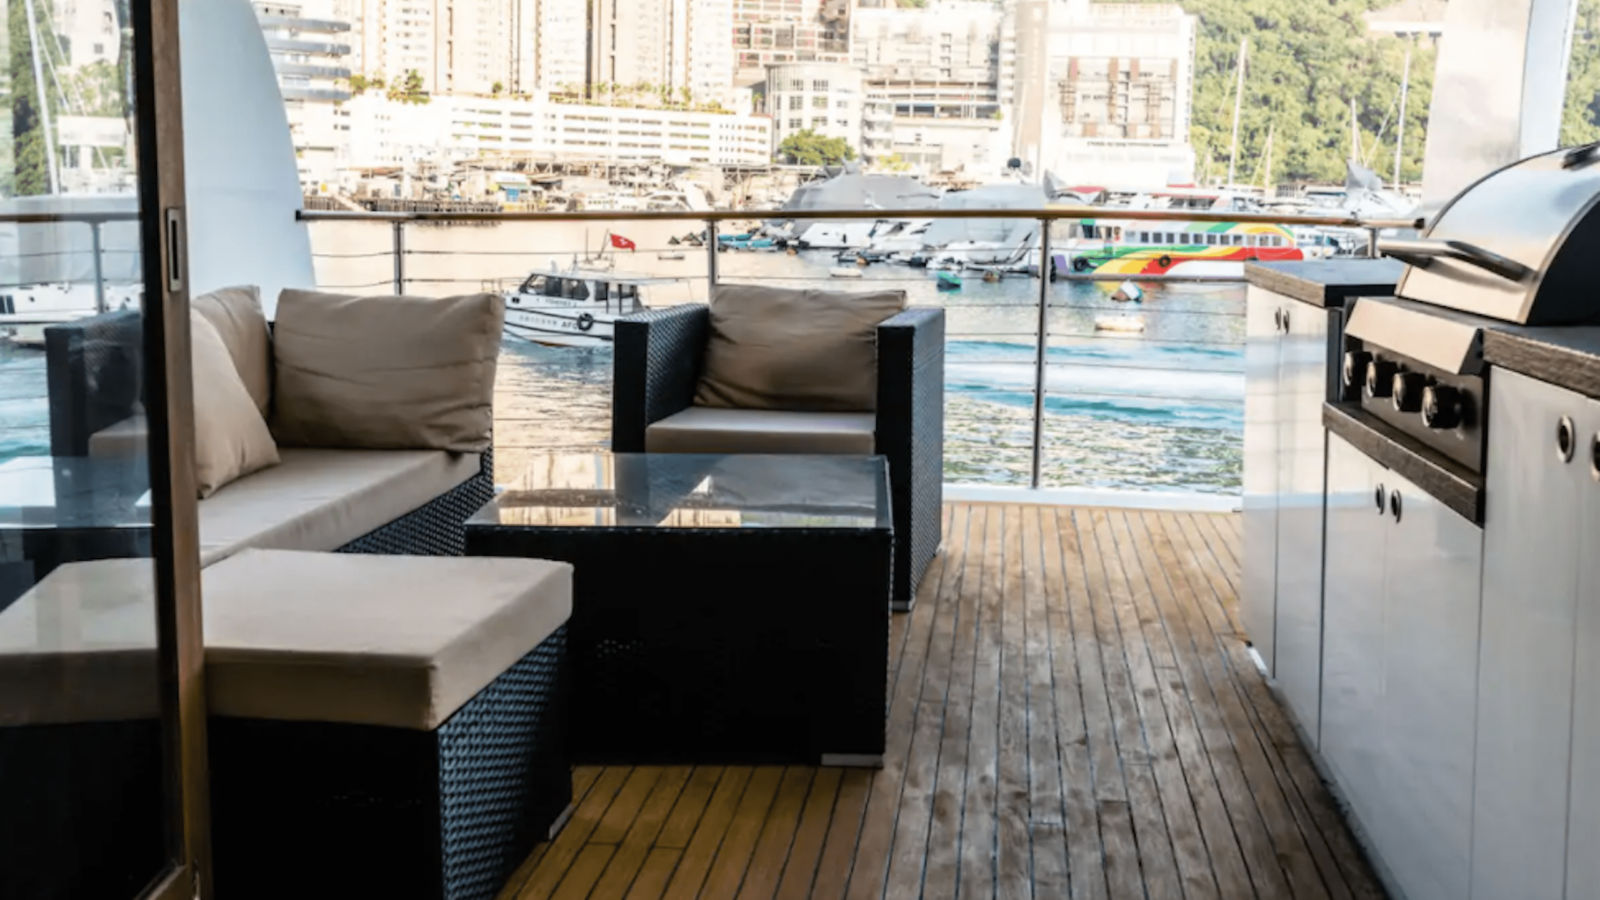 Book a stay aboard one of these unique Hong Kong houseboats